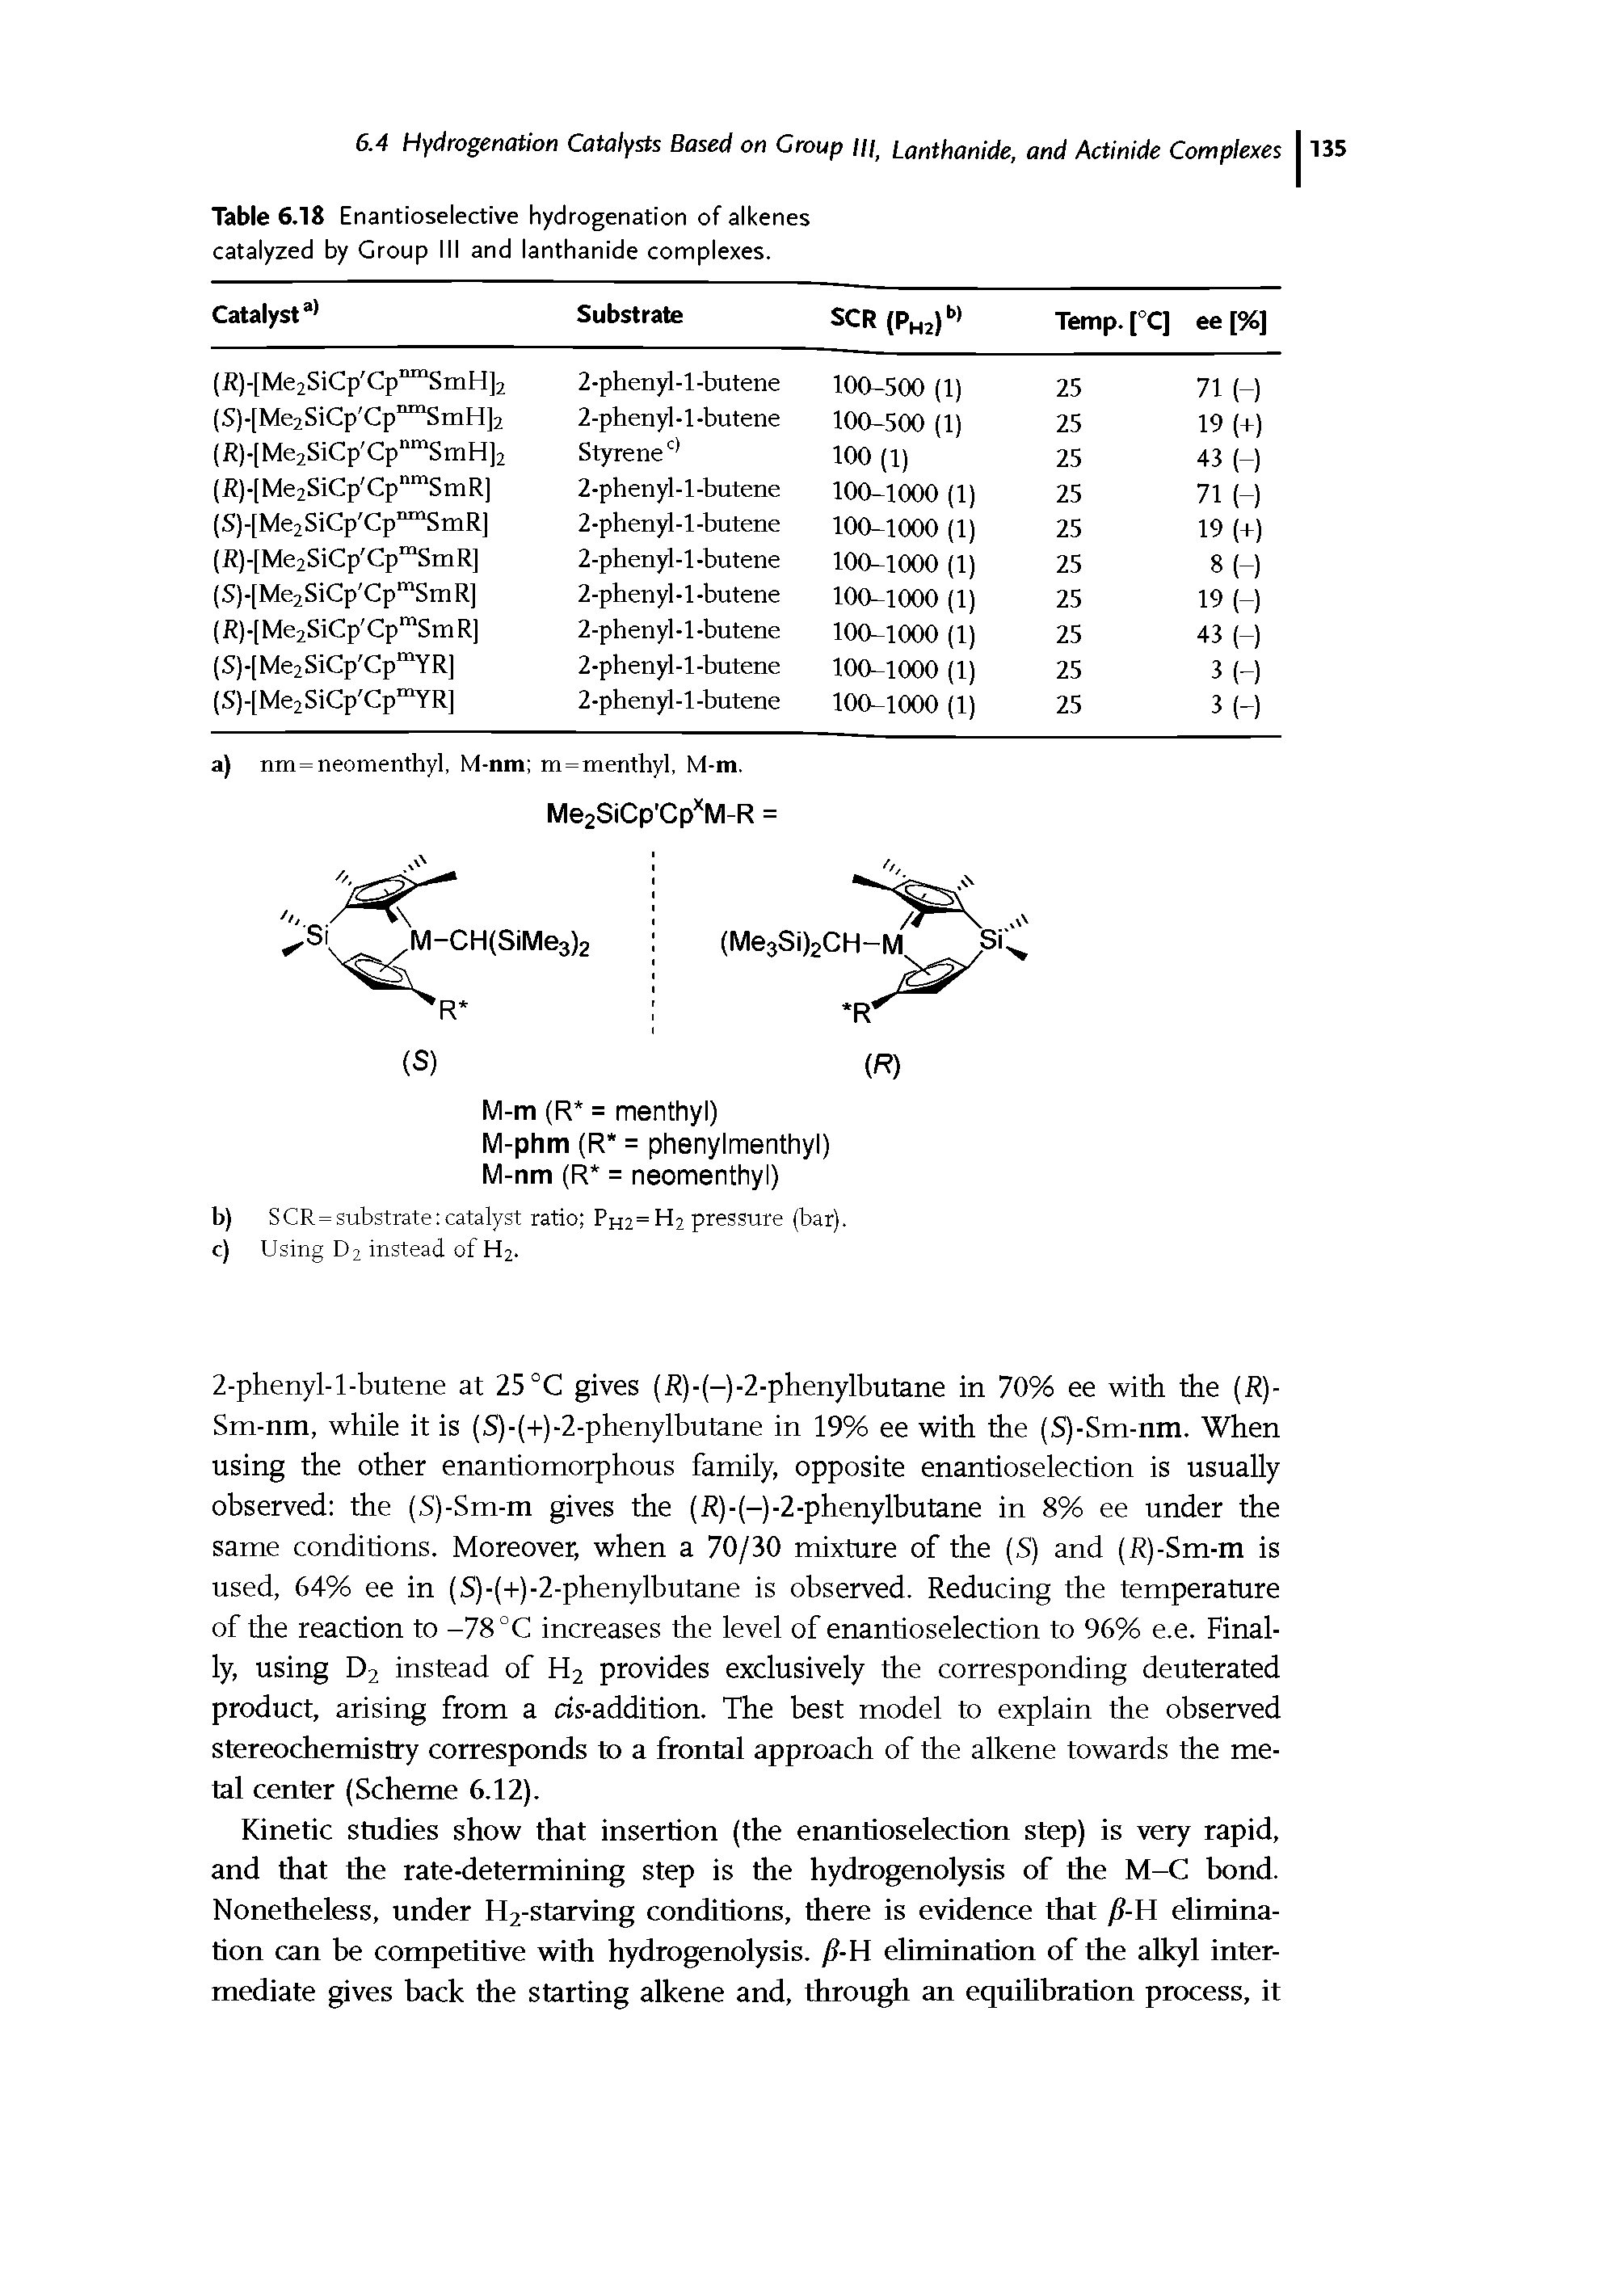 Table 6.18 Enantioselective hydrogenation of alkenes catalyzed by Group III and lanthanide complexes.